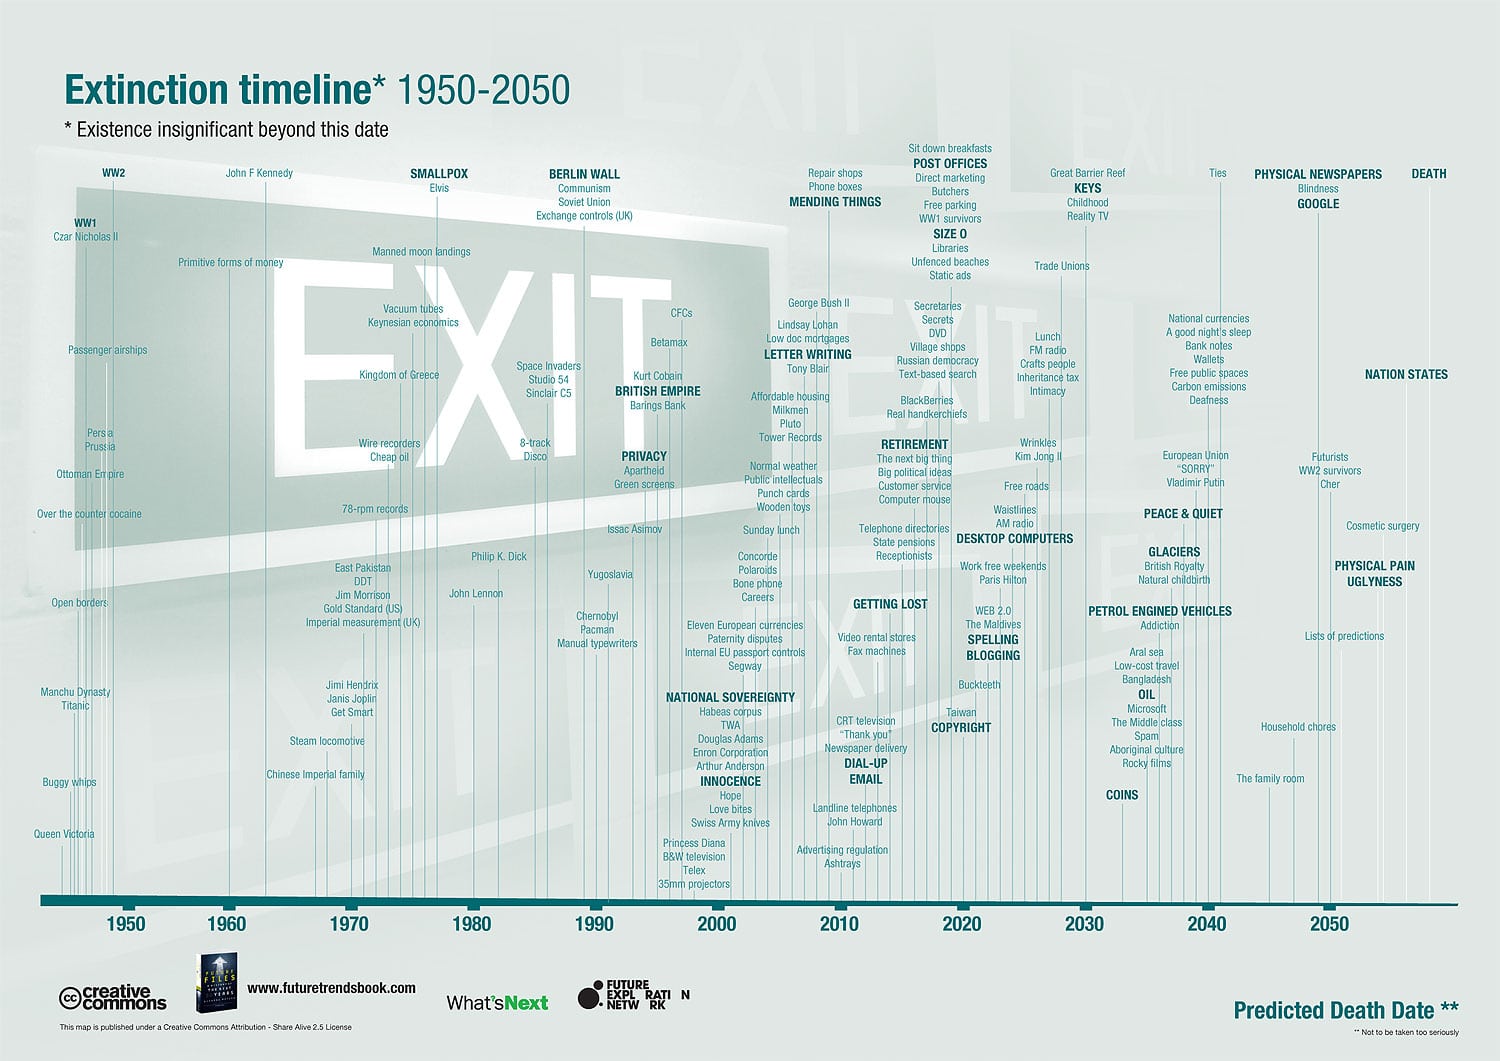 Extinction Timeline: Everything Has An Expiration Date